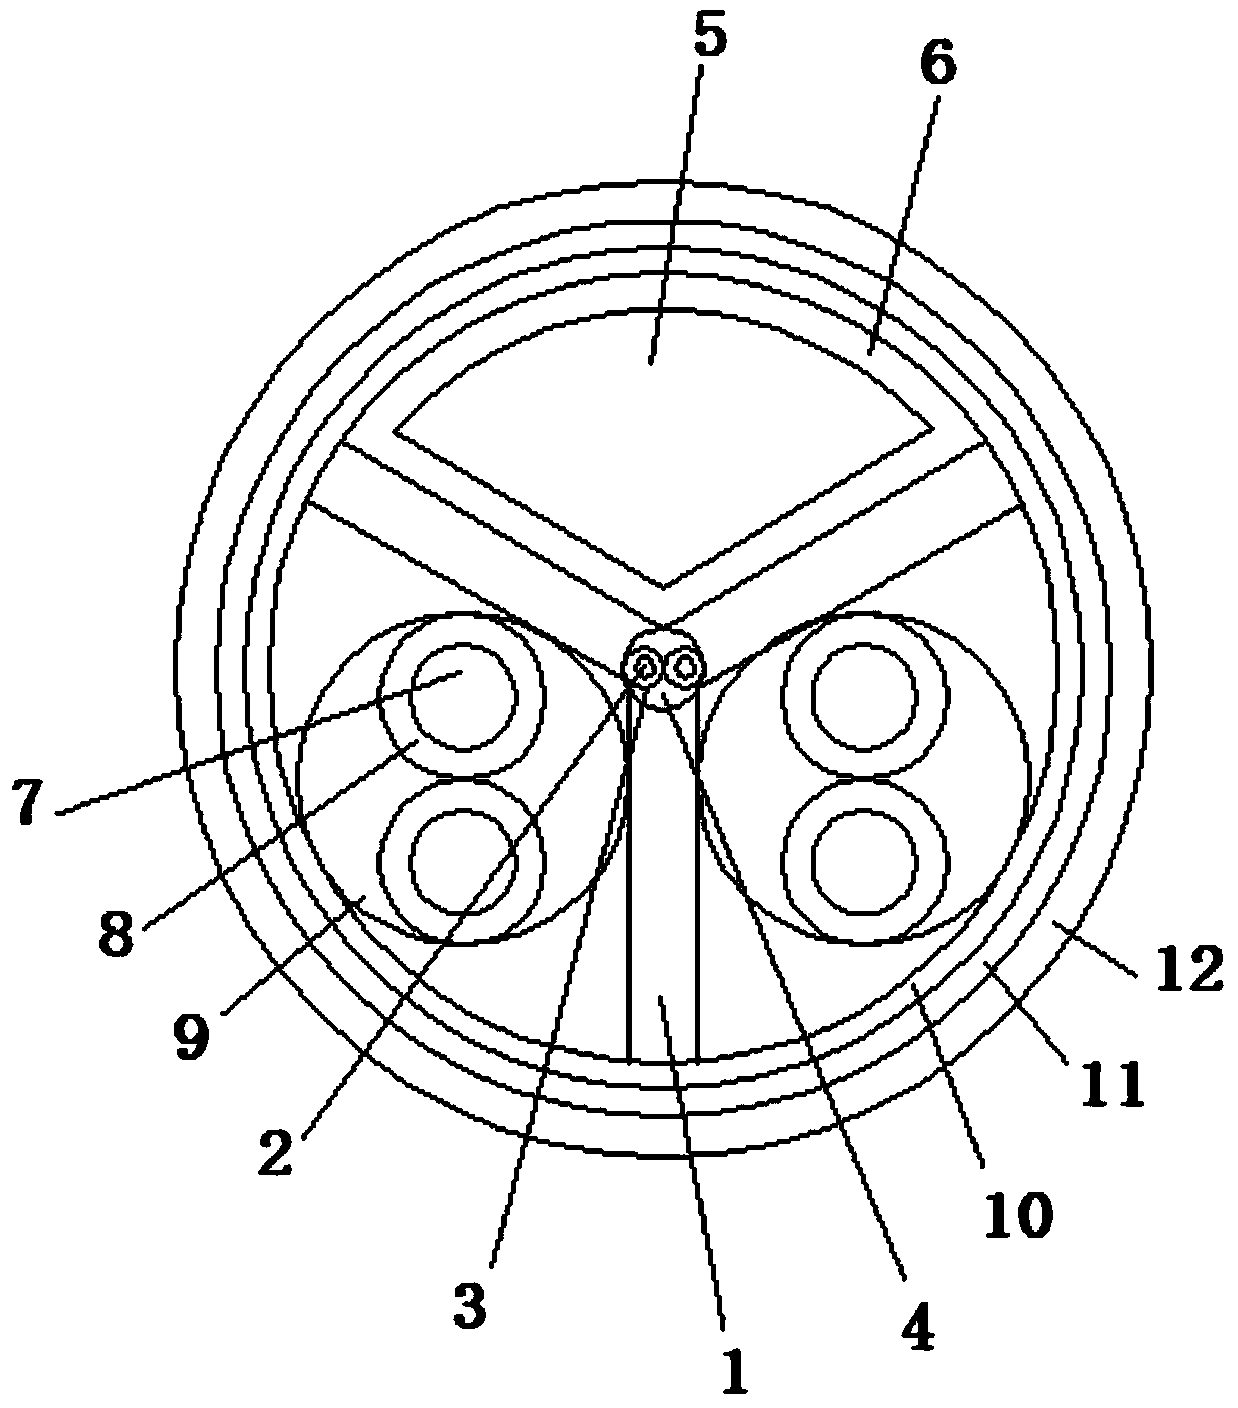 Fan-shaped and round fire-resisting cable provided with Y-shaped nylon framework